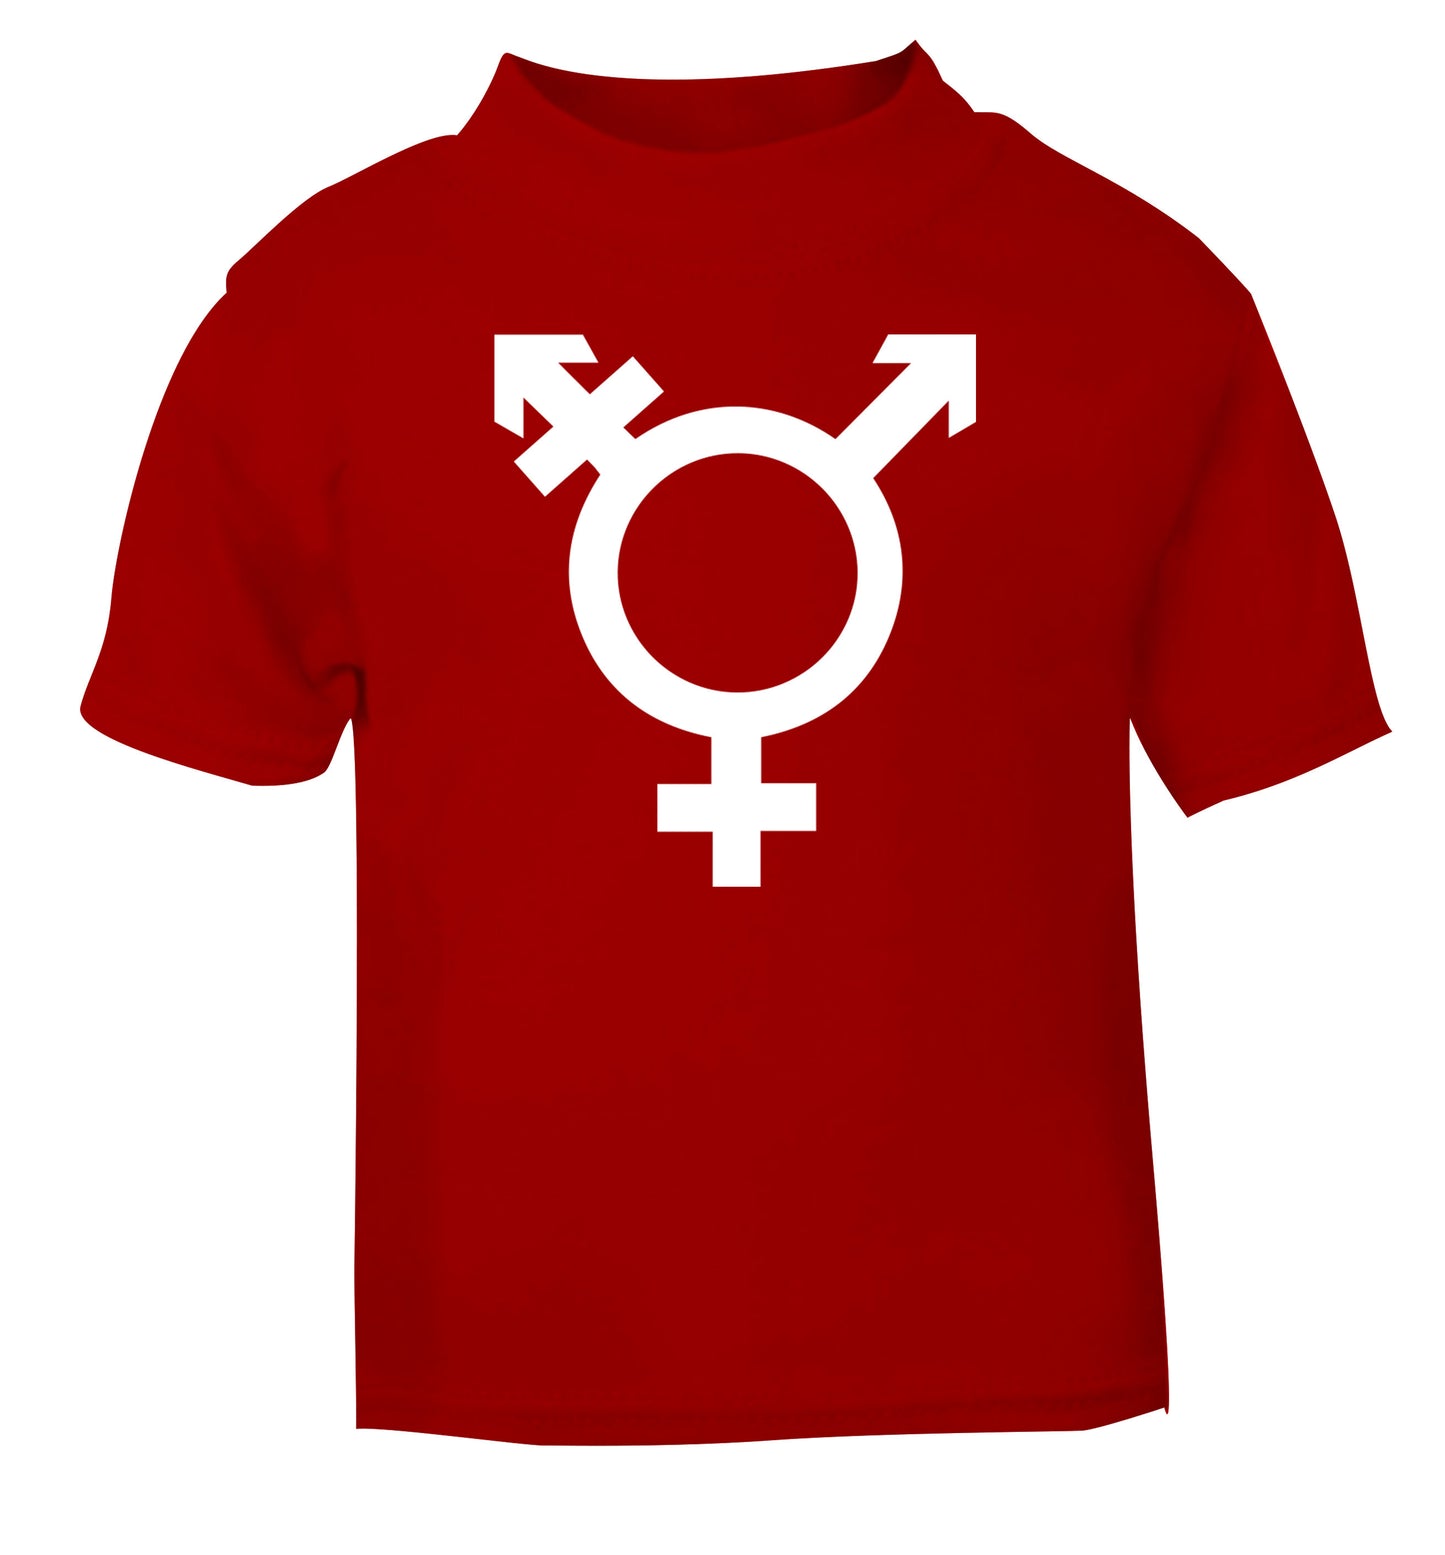 Gender neutral symbol large red Baby Toddler Tshirt 2 Years